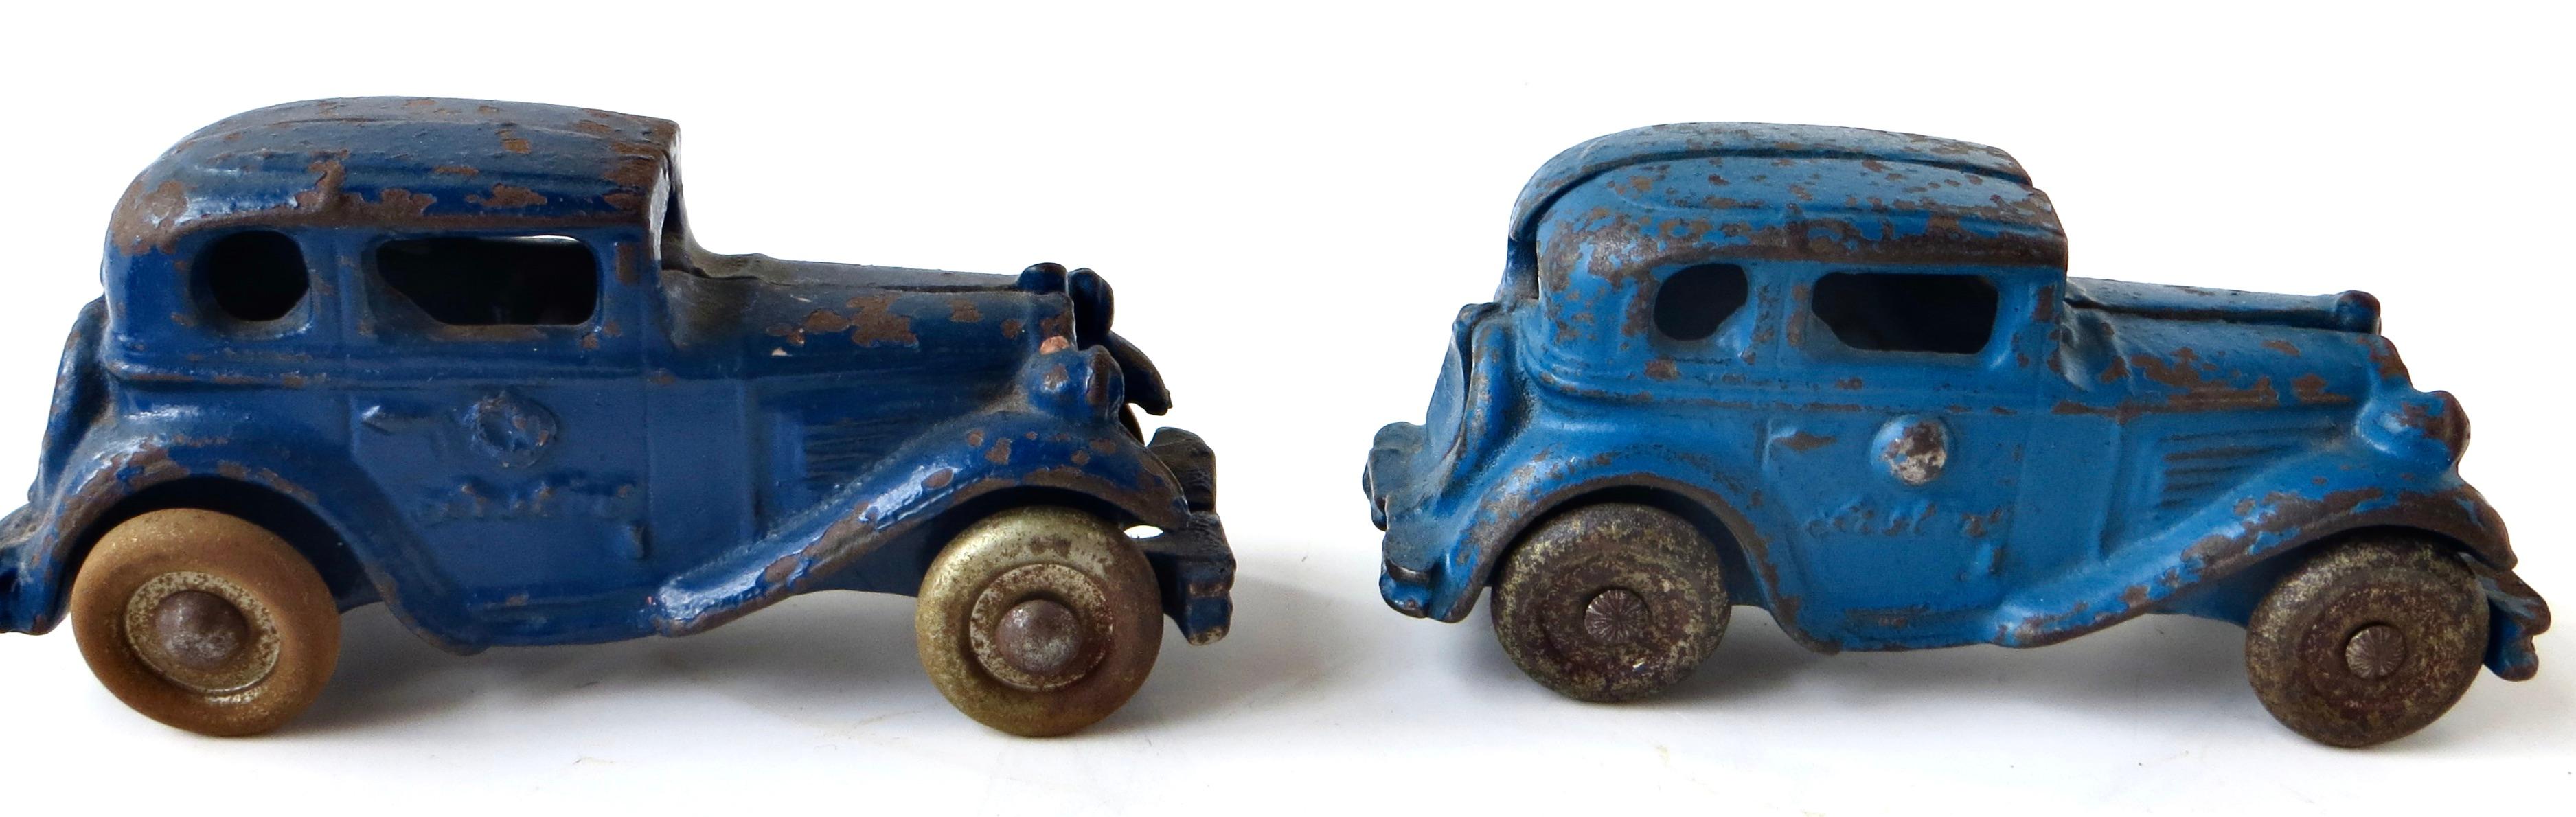 Toy Cast Iron Truck Car Carrier; Three Cars by A.C. Williams American Circa 1930 In Good Condition For Sale In Incline Village, NV